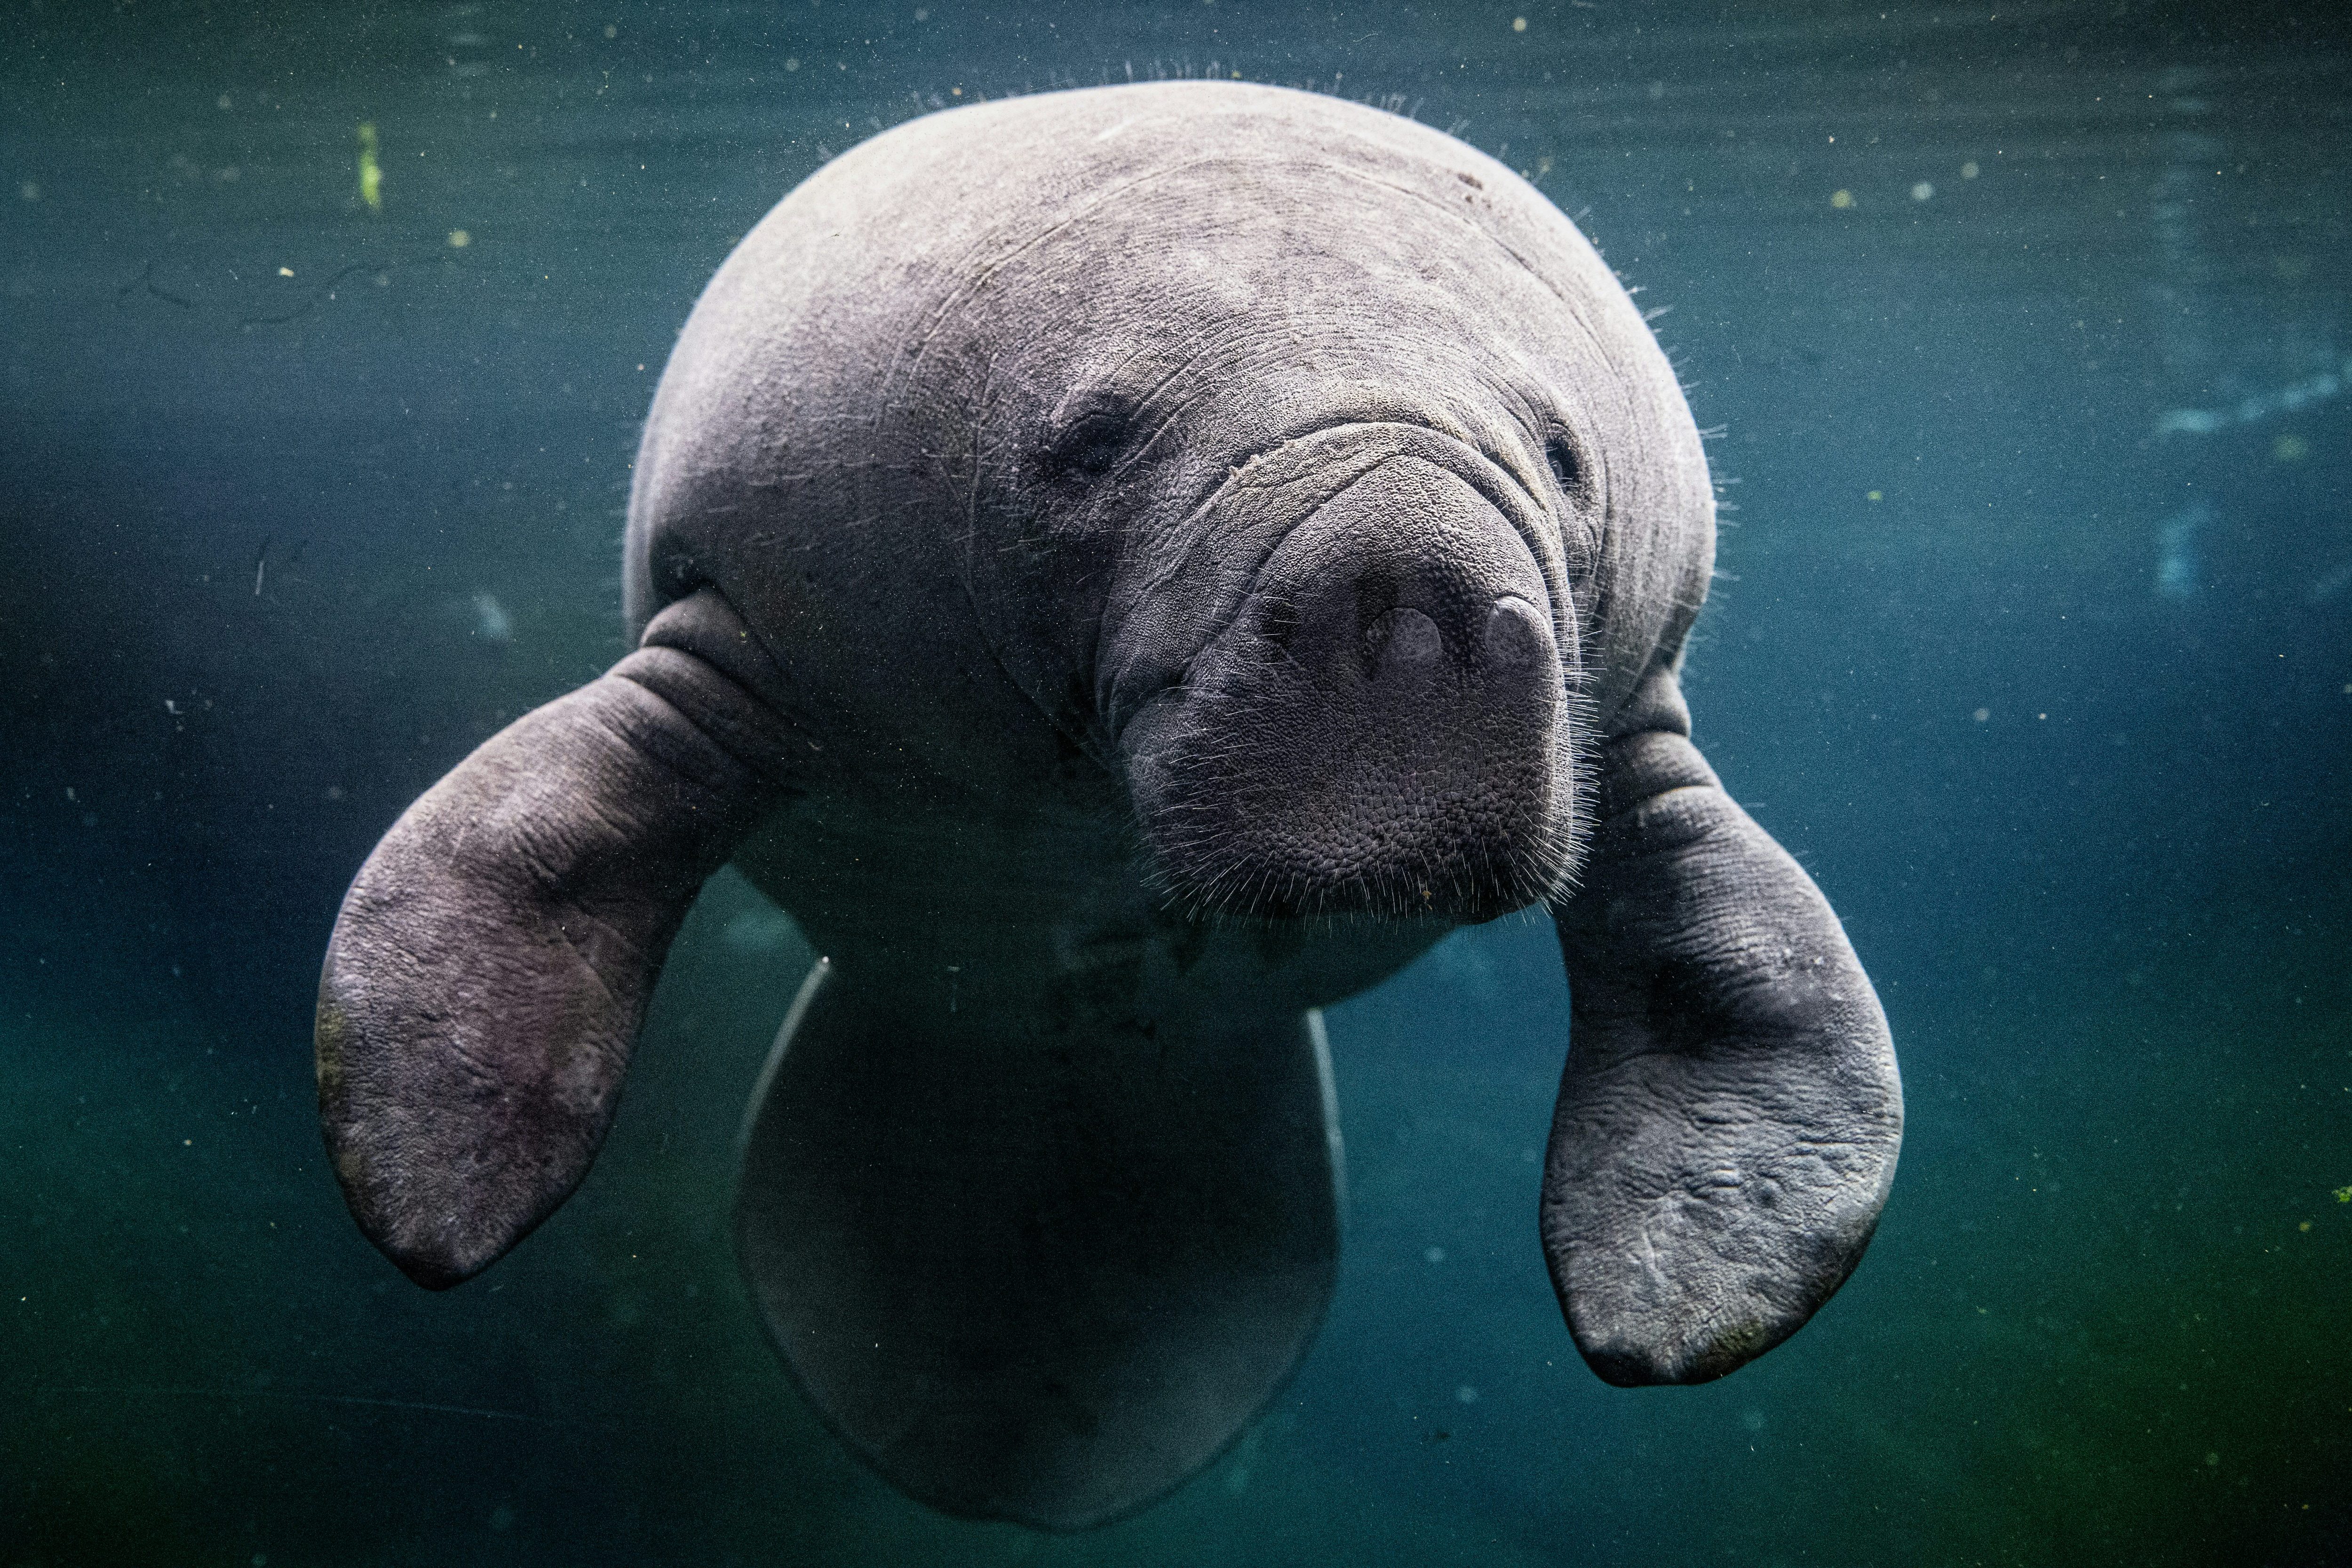 A new member at the Paris Zoological Park, a female manatee called Unai, settles in. She came from a zoo in central France and has been brought to Paris in the hopes she will mate with the park’s two male manatees